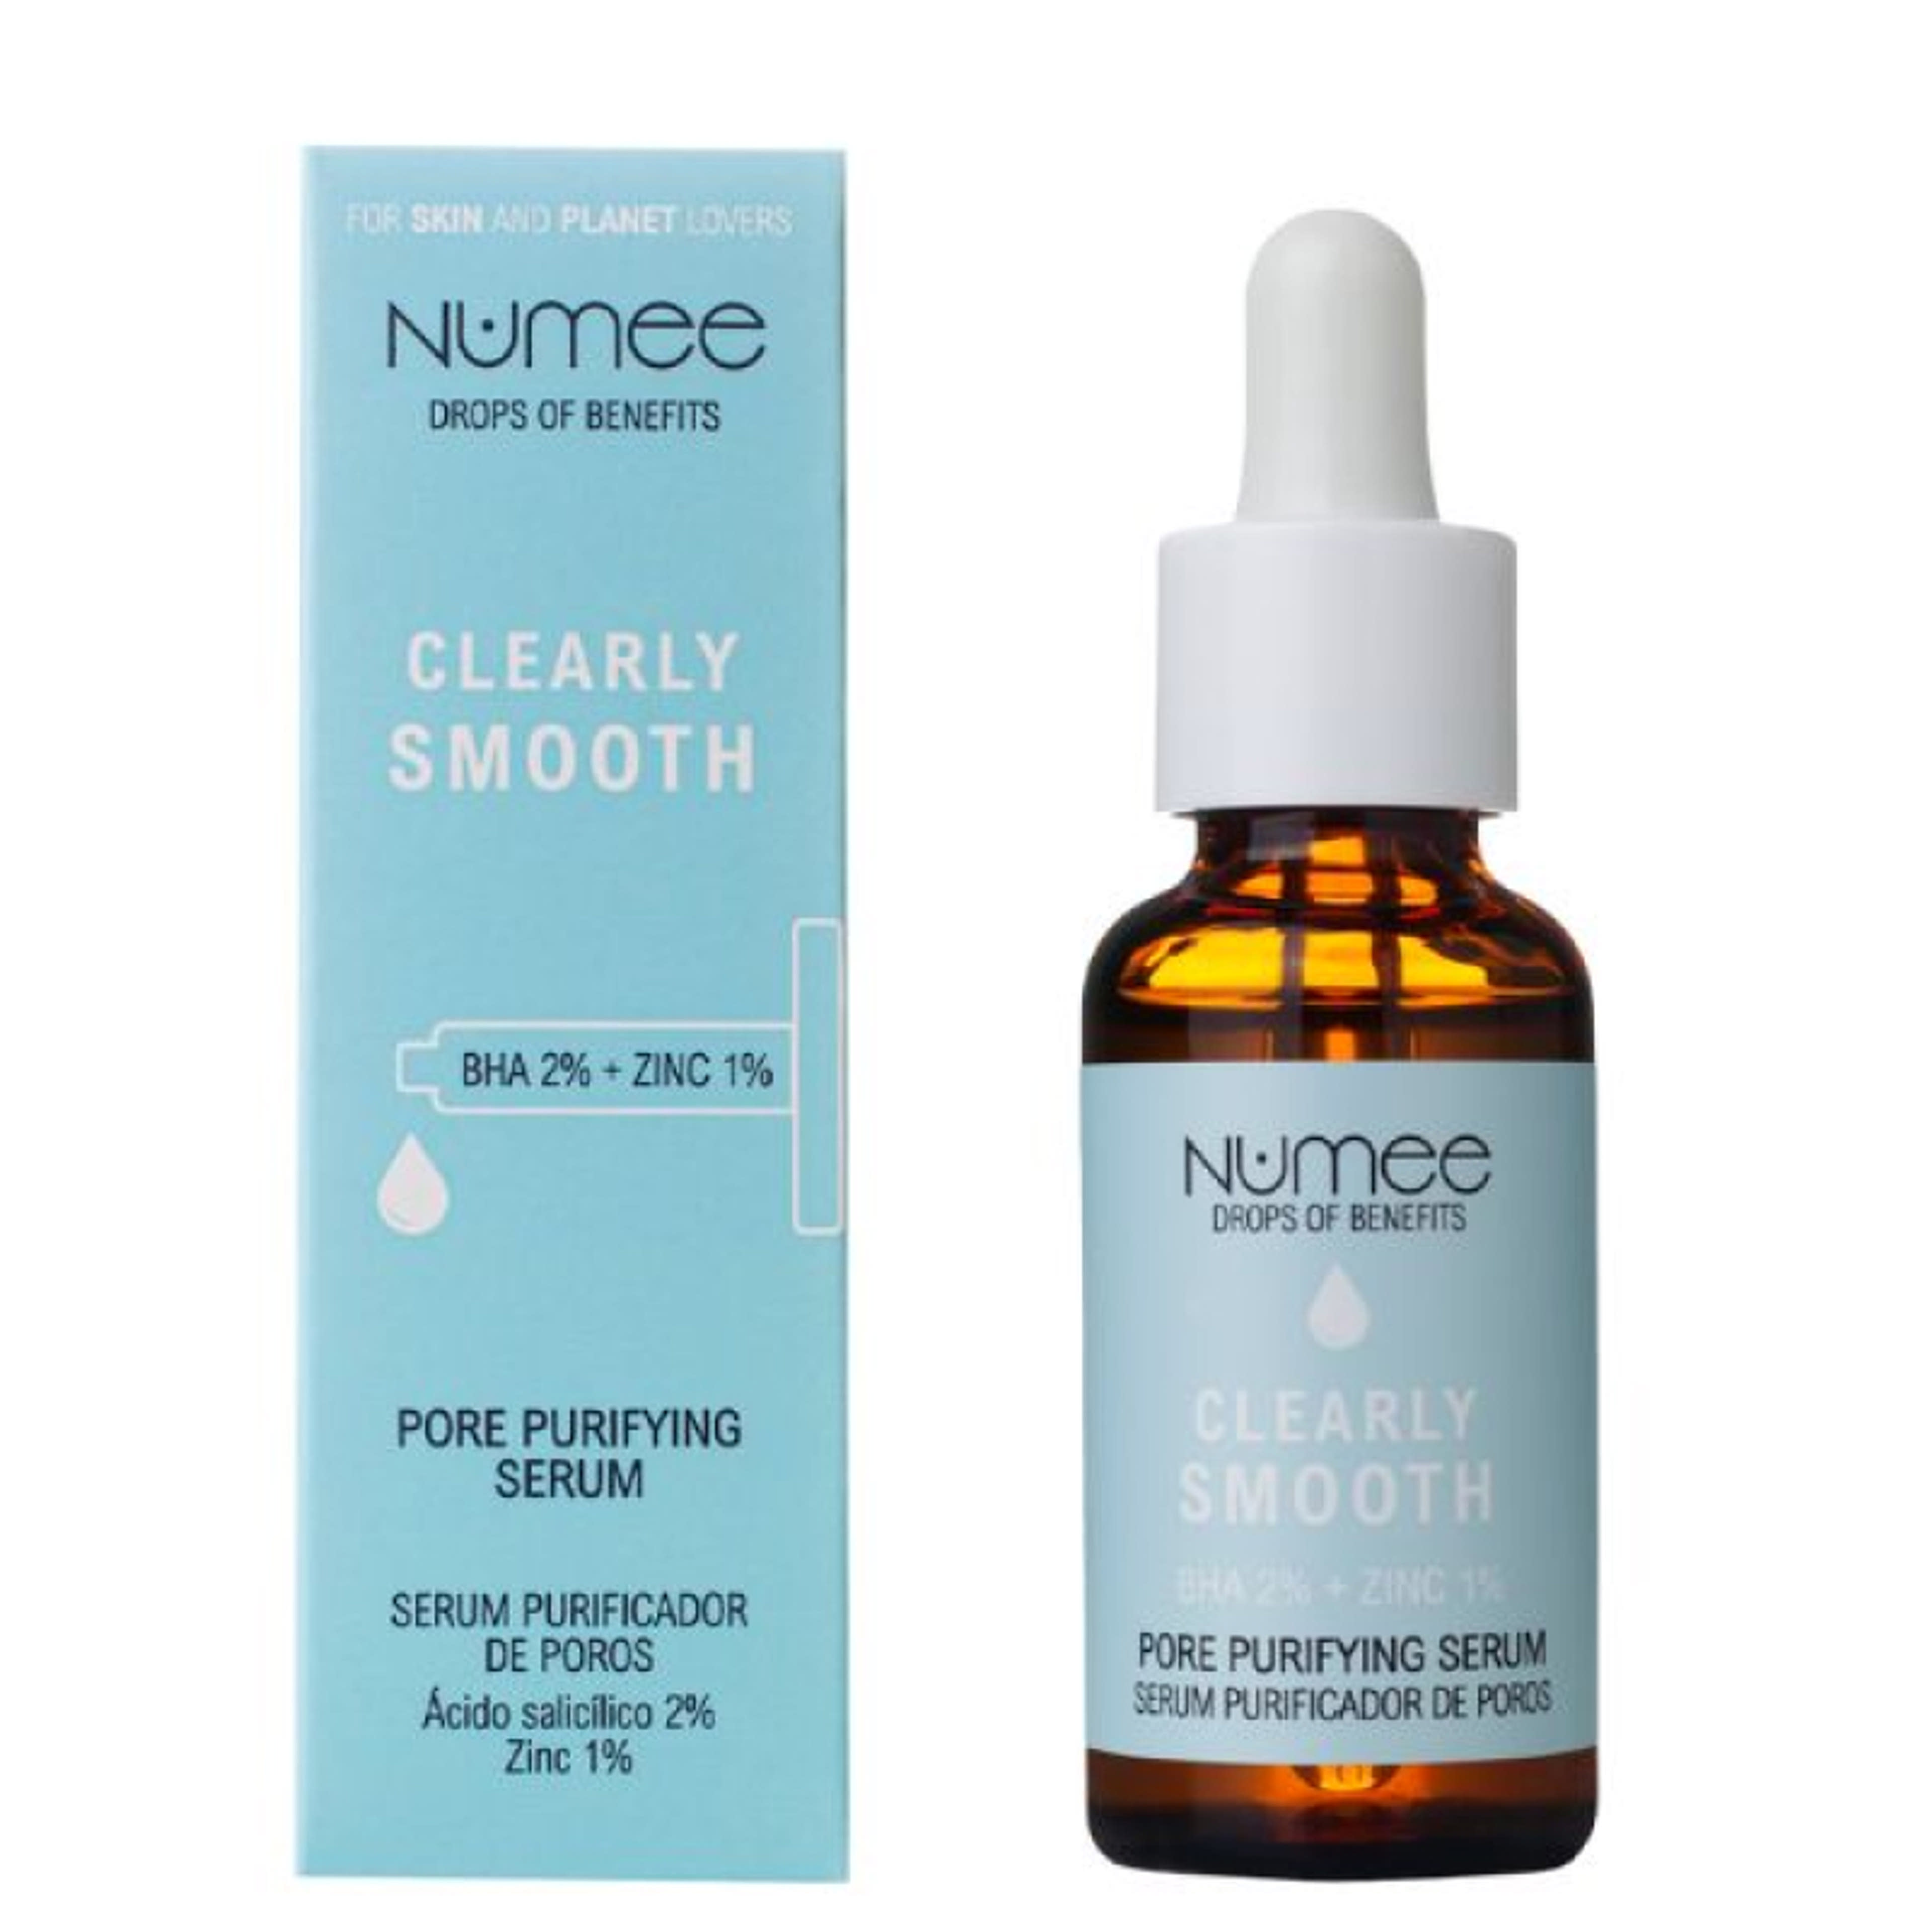 Numee Drops of Benefits Clearly Smooth Salicylic Acid szérum - 30 ml-3